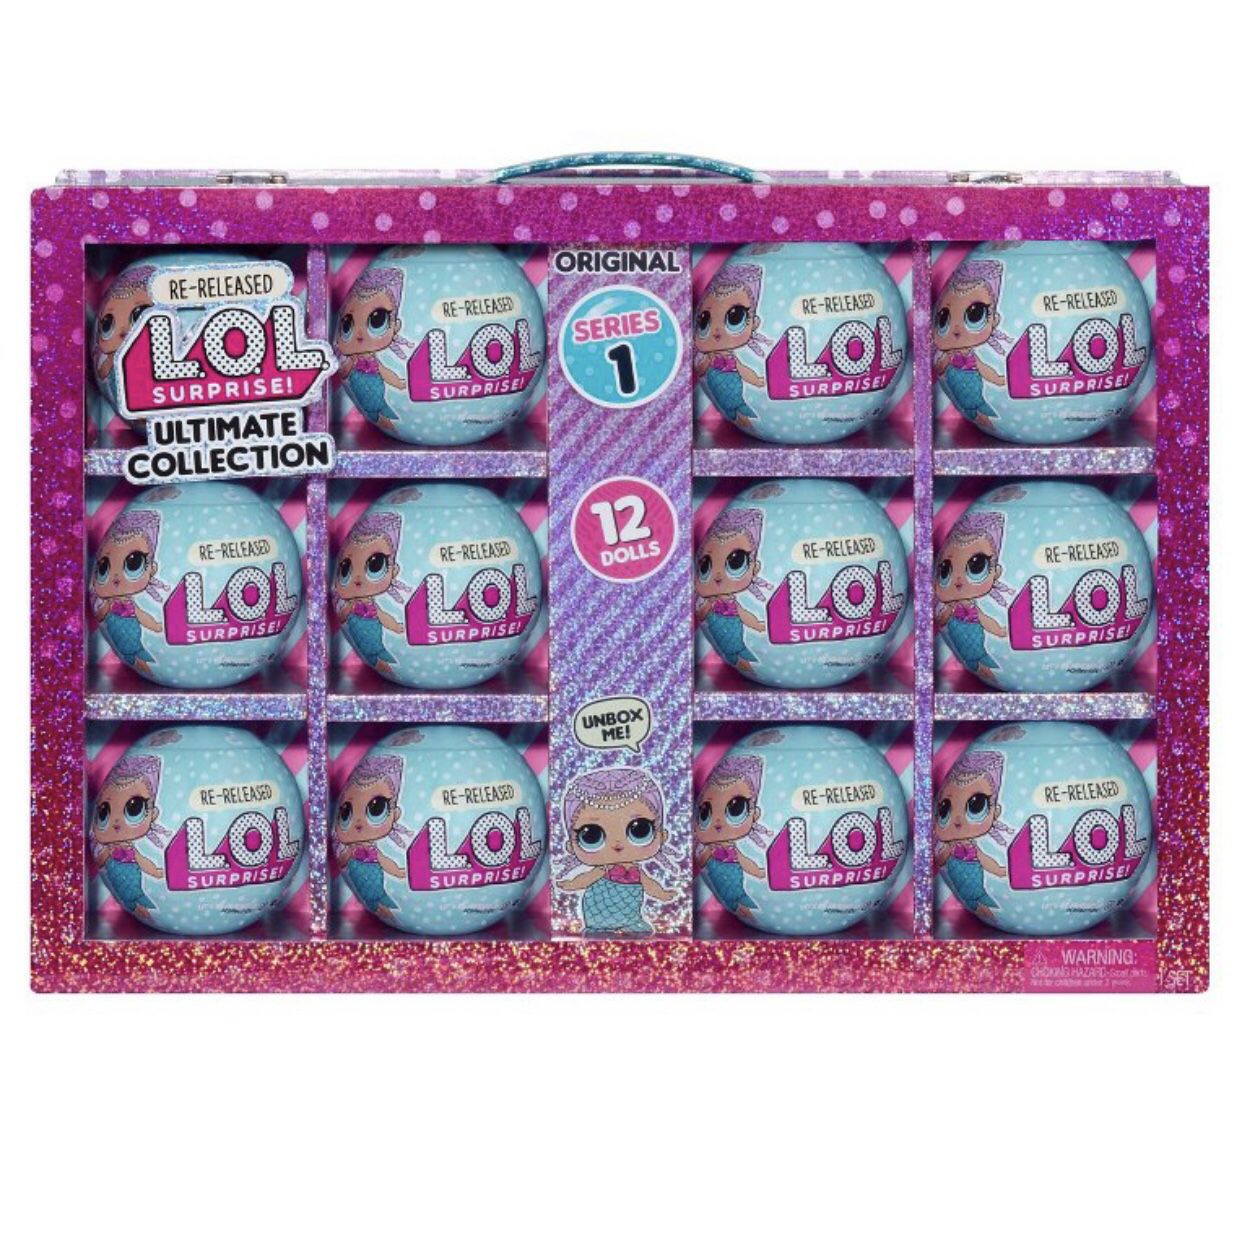 LOL Surprise Merbaby Series 1 Ultimate Collection 12 Balls Re-released Dolls New